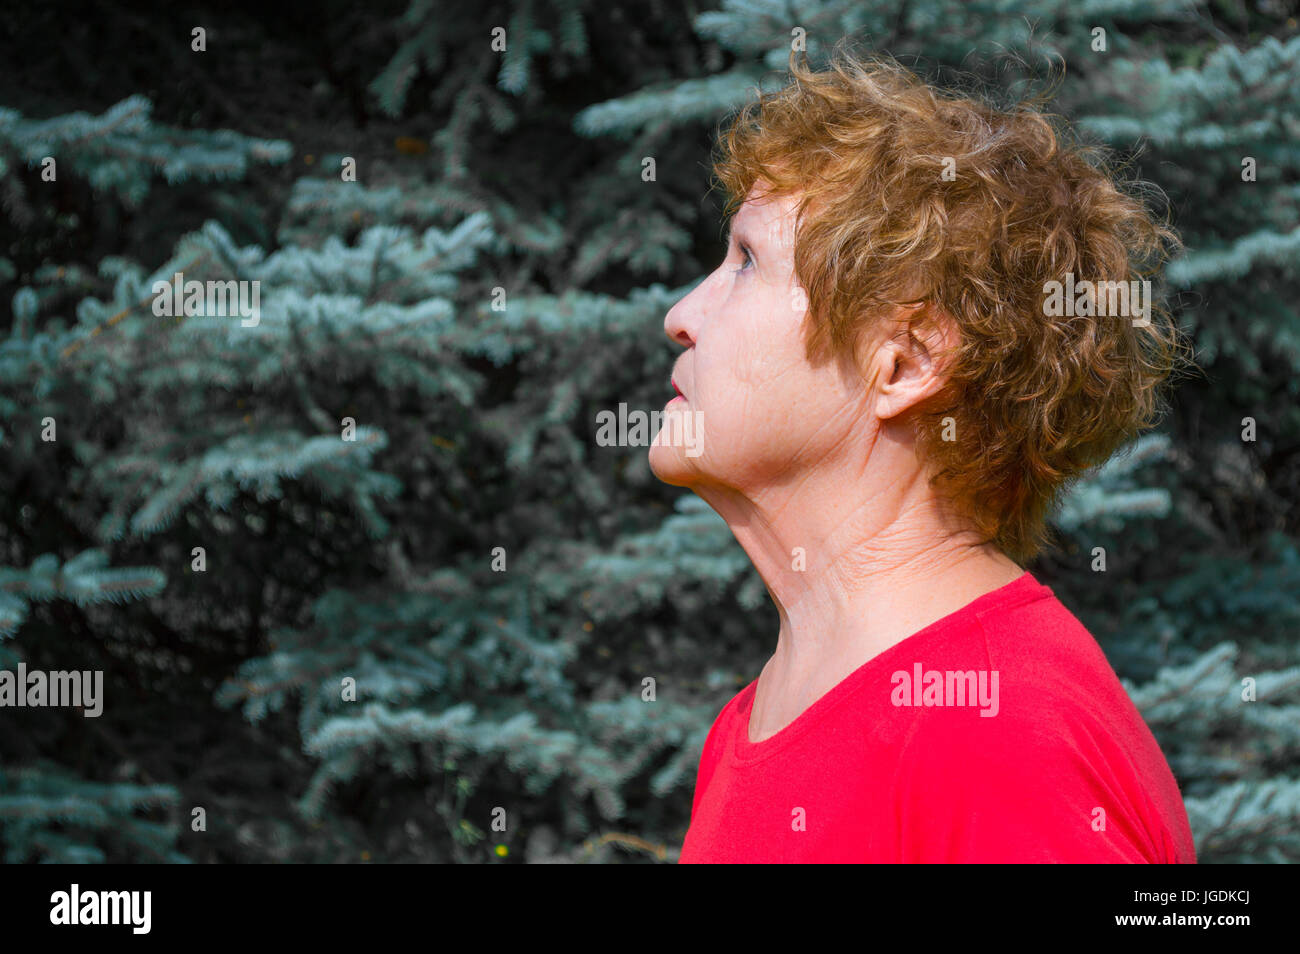 close up side view of middle aged woman looking upward Stock Photo